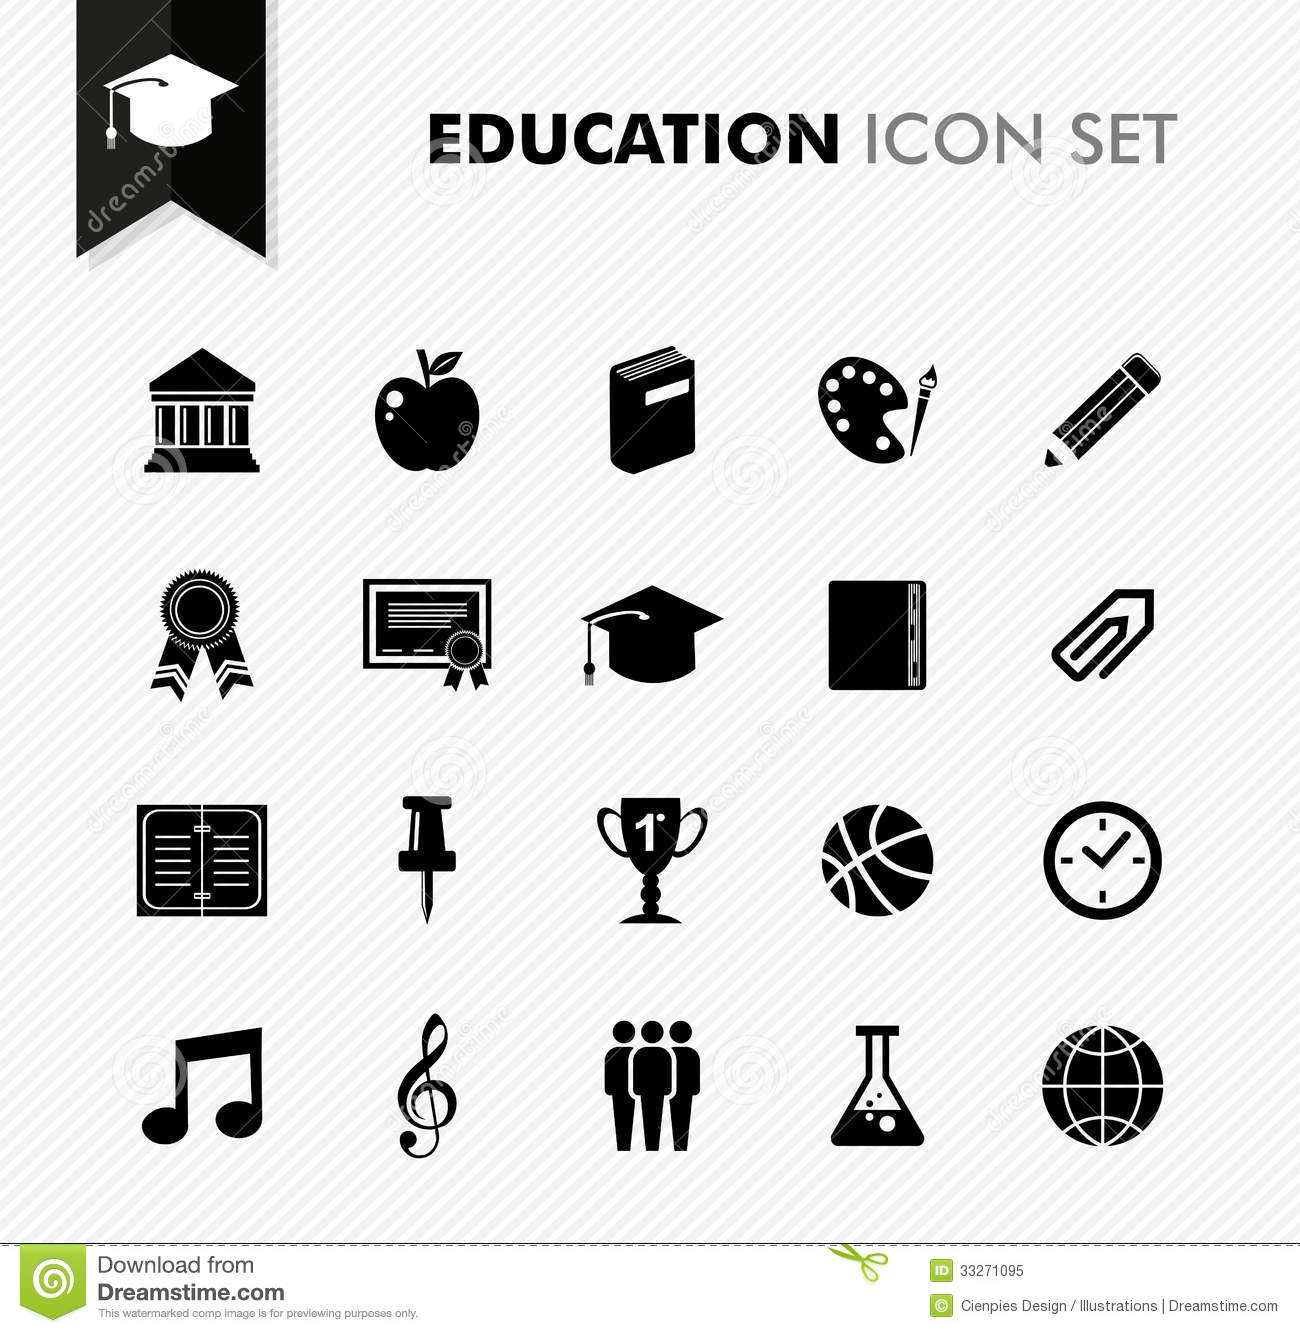 Education Icons Vector Free